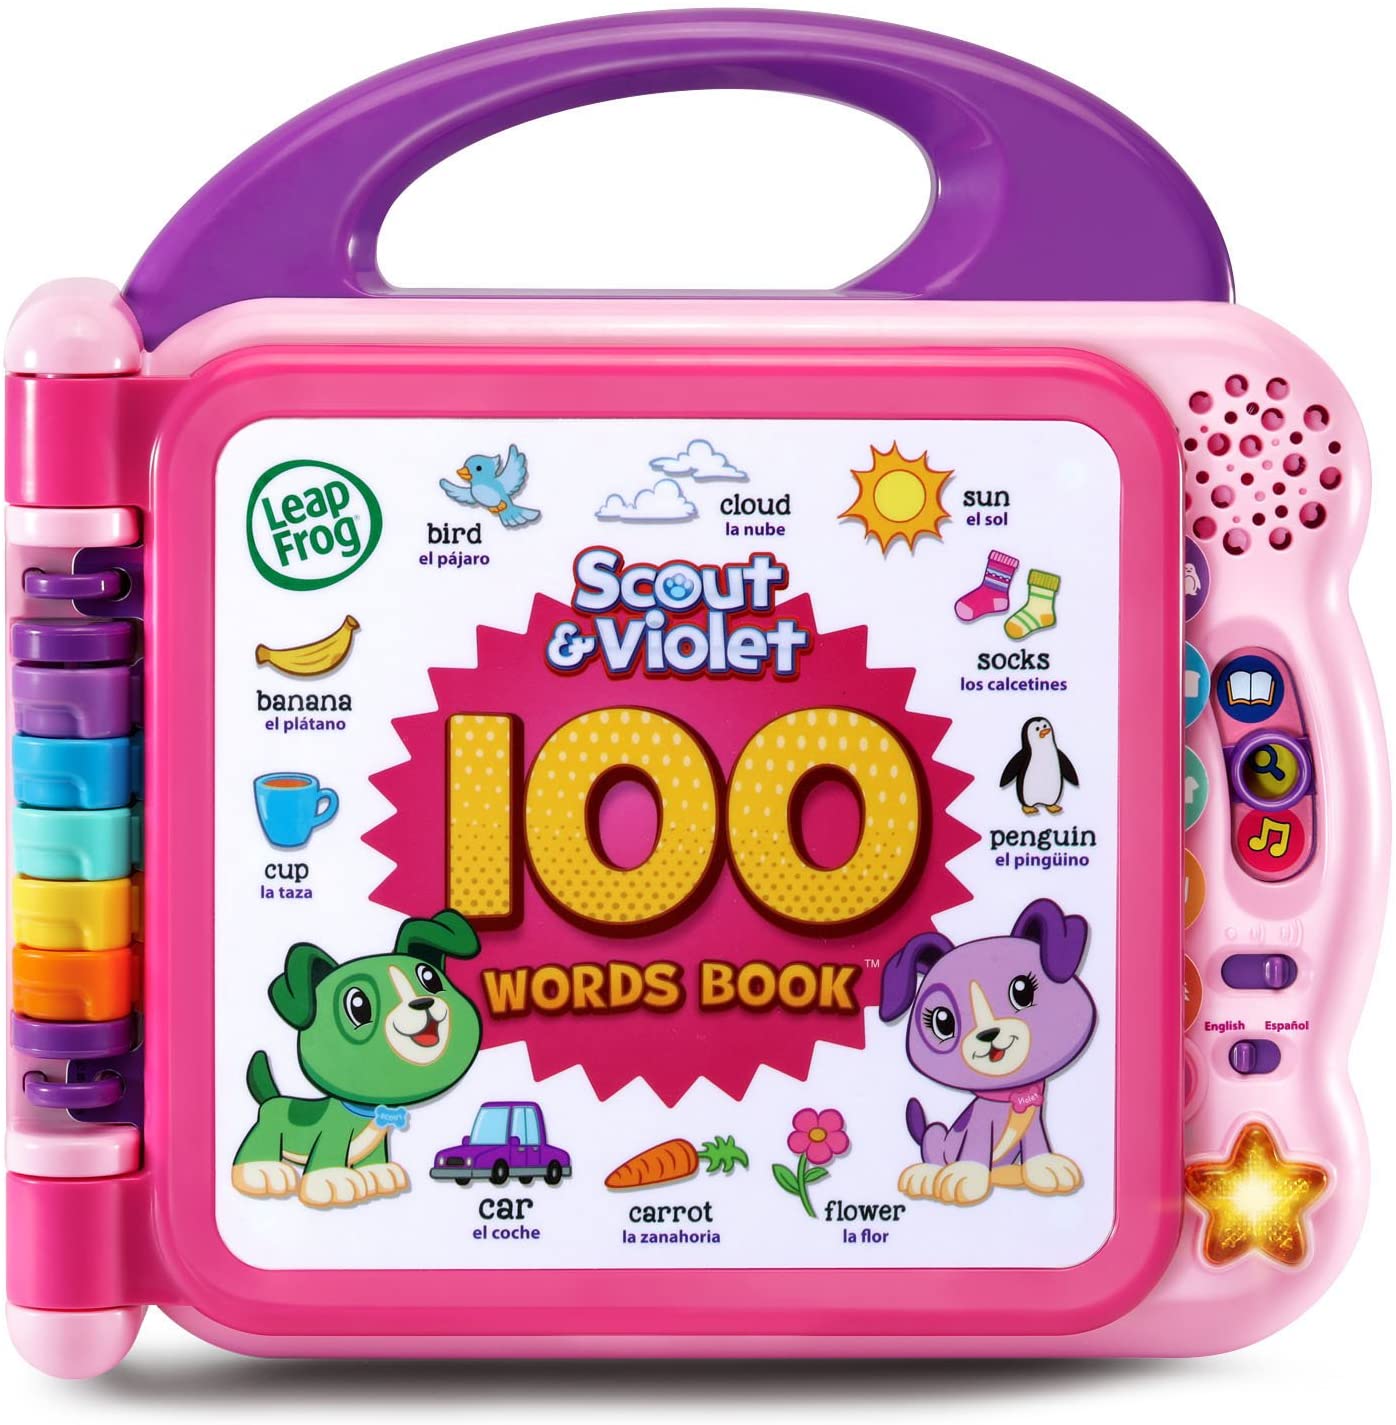 LeapFrog Scout and Violet 100 Words Boo, Purple - image 1 of 8